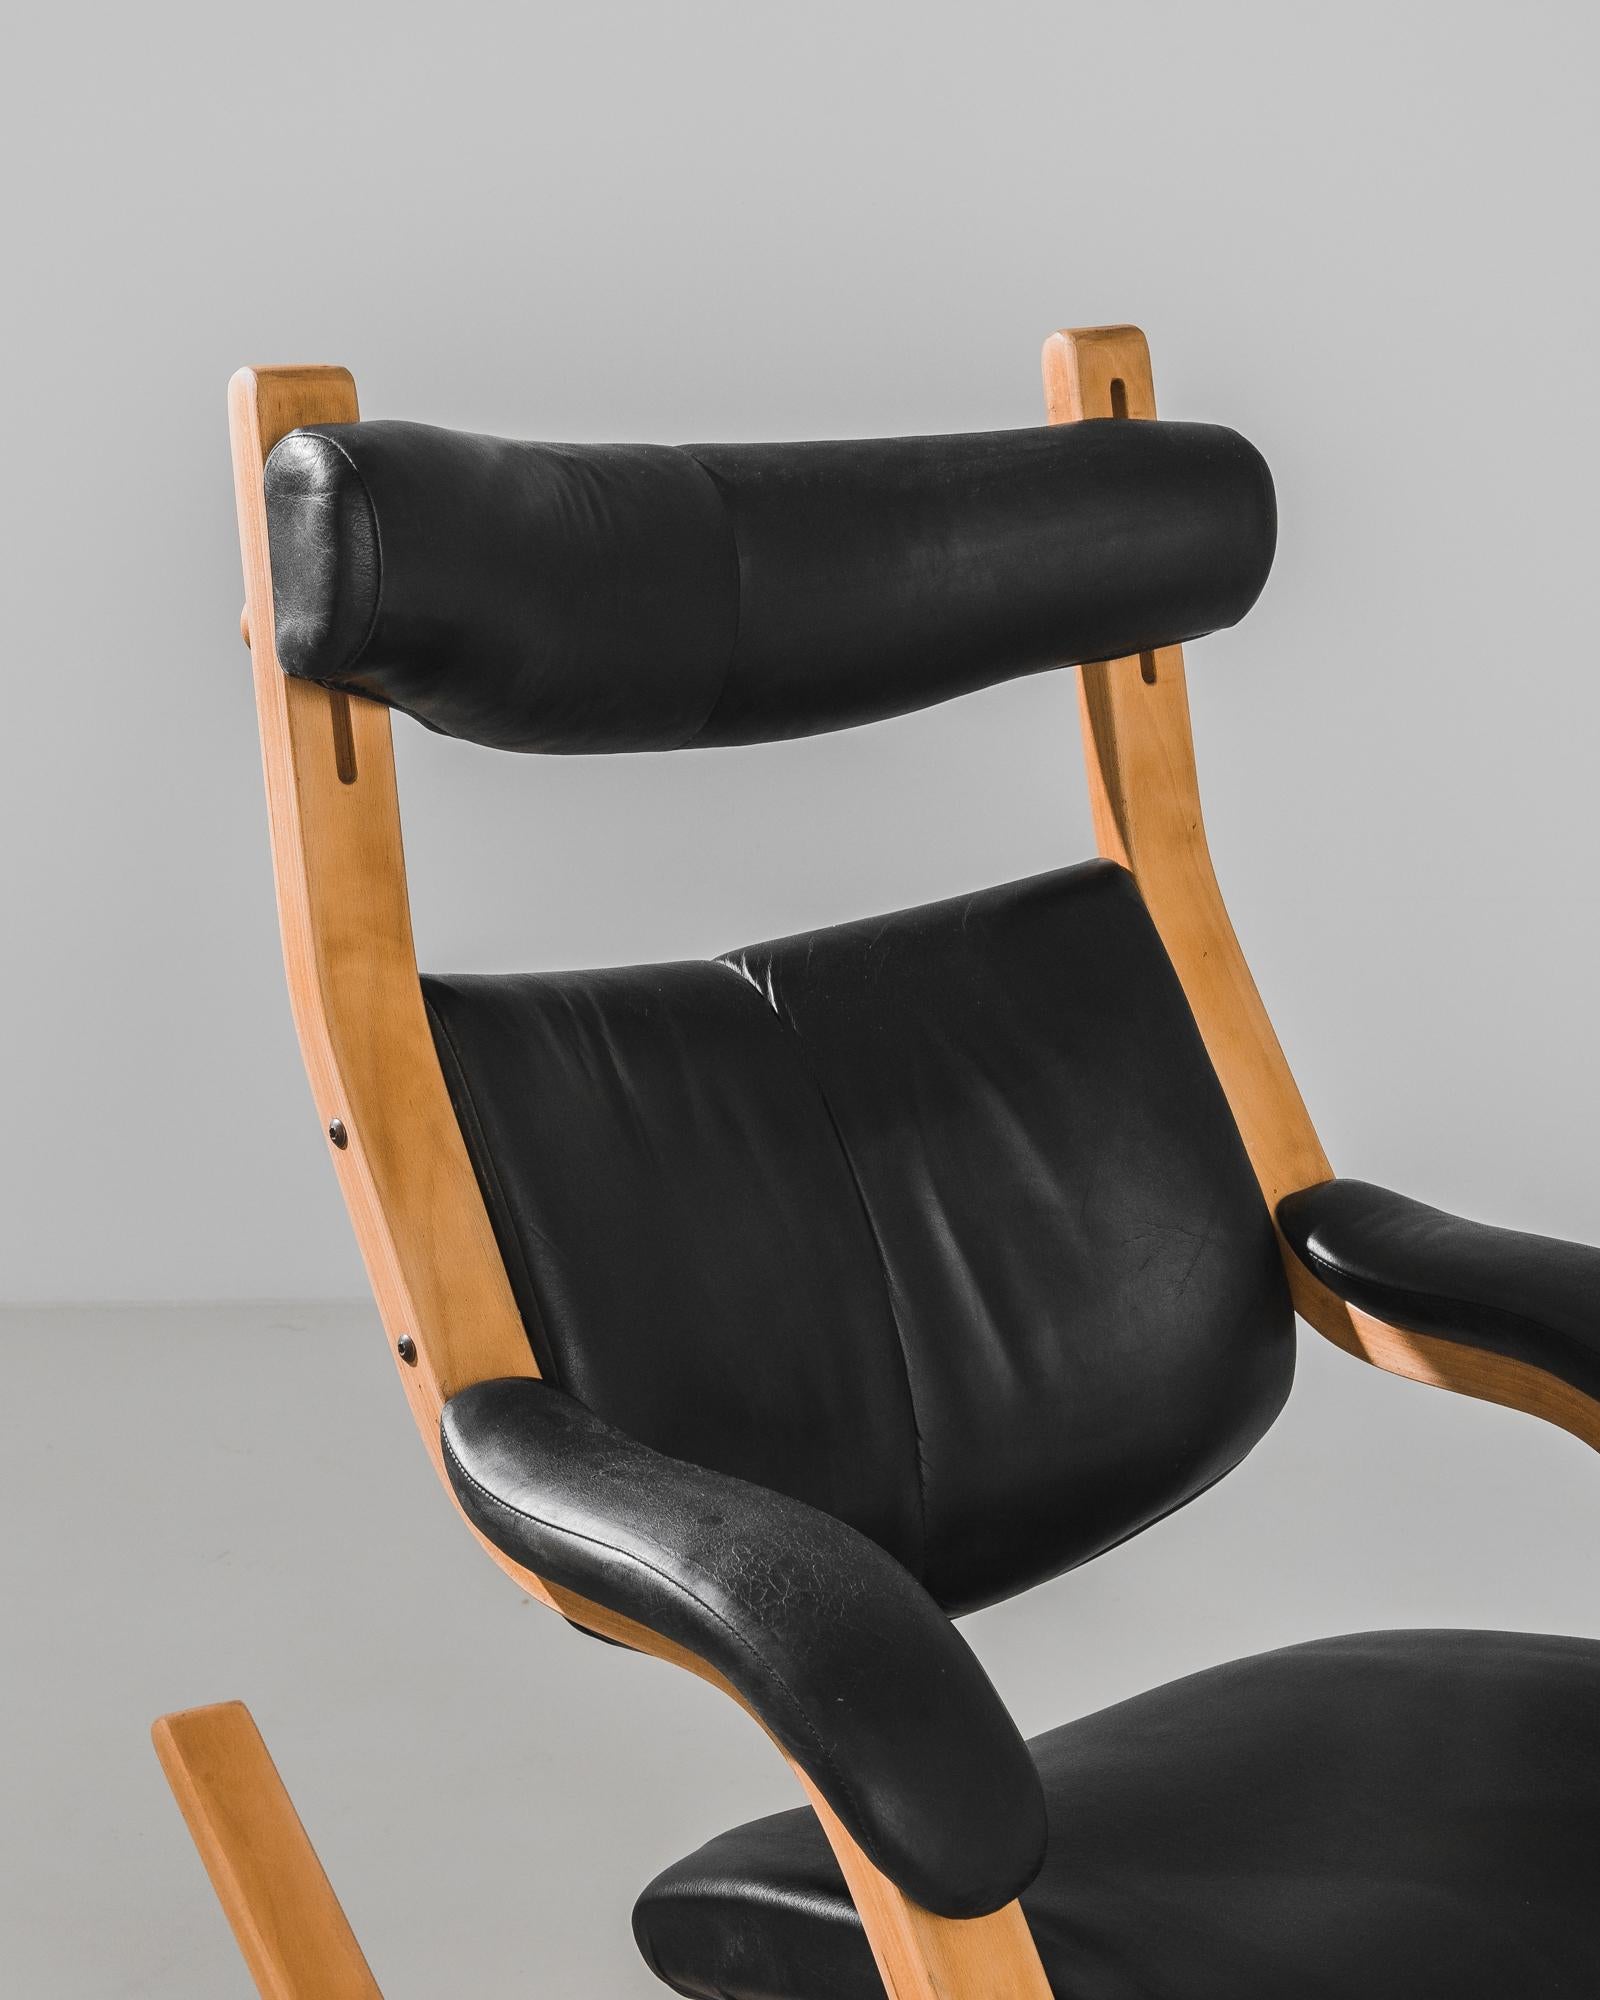 Unwind in the sculptural elegance of this 1970s Danish Rocking Chair, a masterpiece designed by Peter Opsvik for Stokke. This iconic piece combines the warmth of smooth wood with the luxurious comfort of leather. With its ergonomic design, the chair